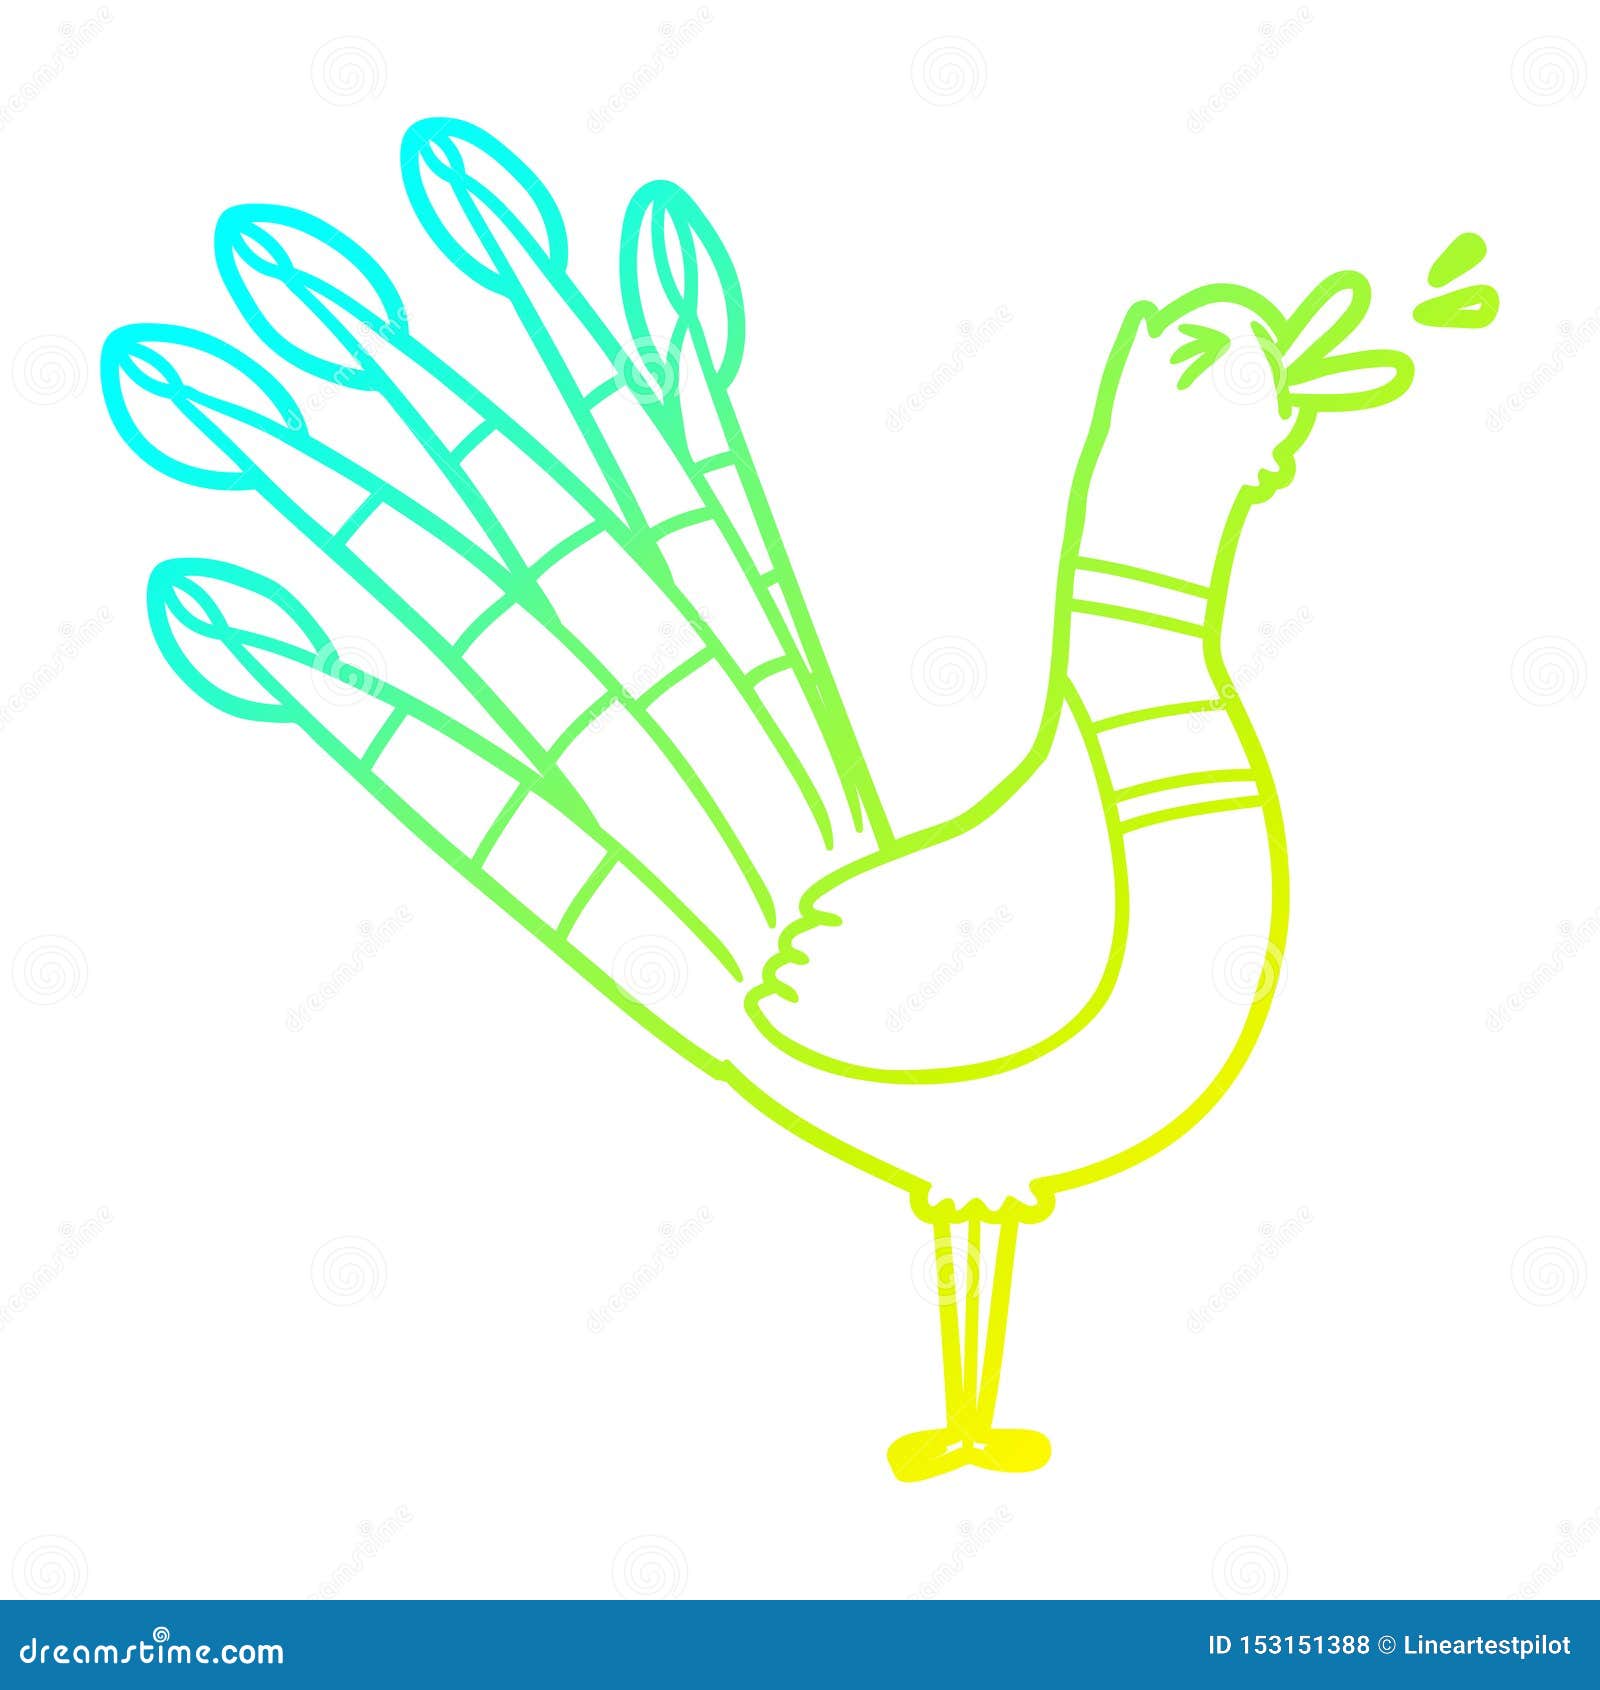 How To Draw Peacock - Easy Drawing Of Peacock Transparent PNG - 678x600 -  Free Download on NicePNG